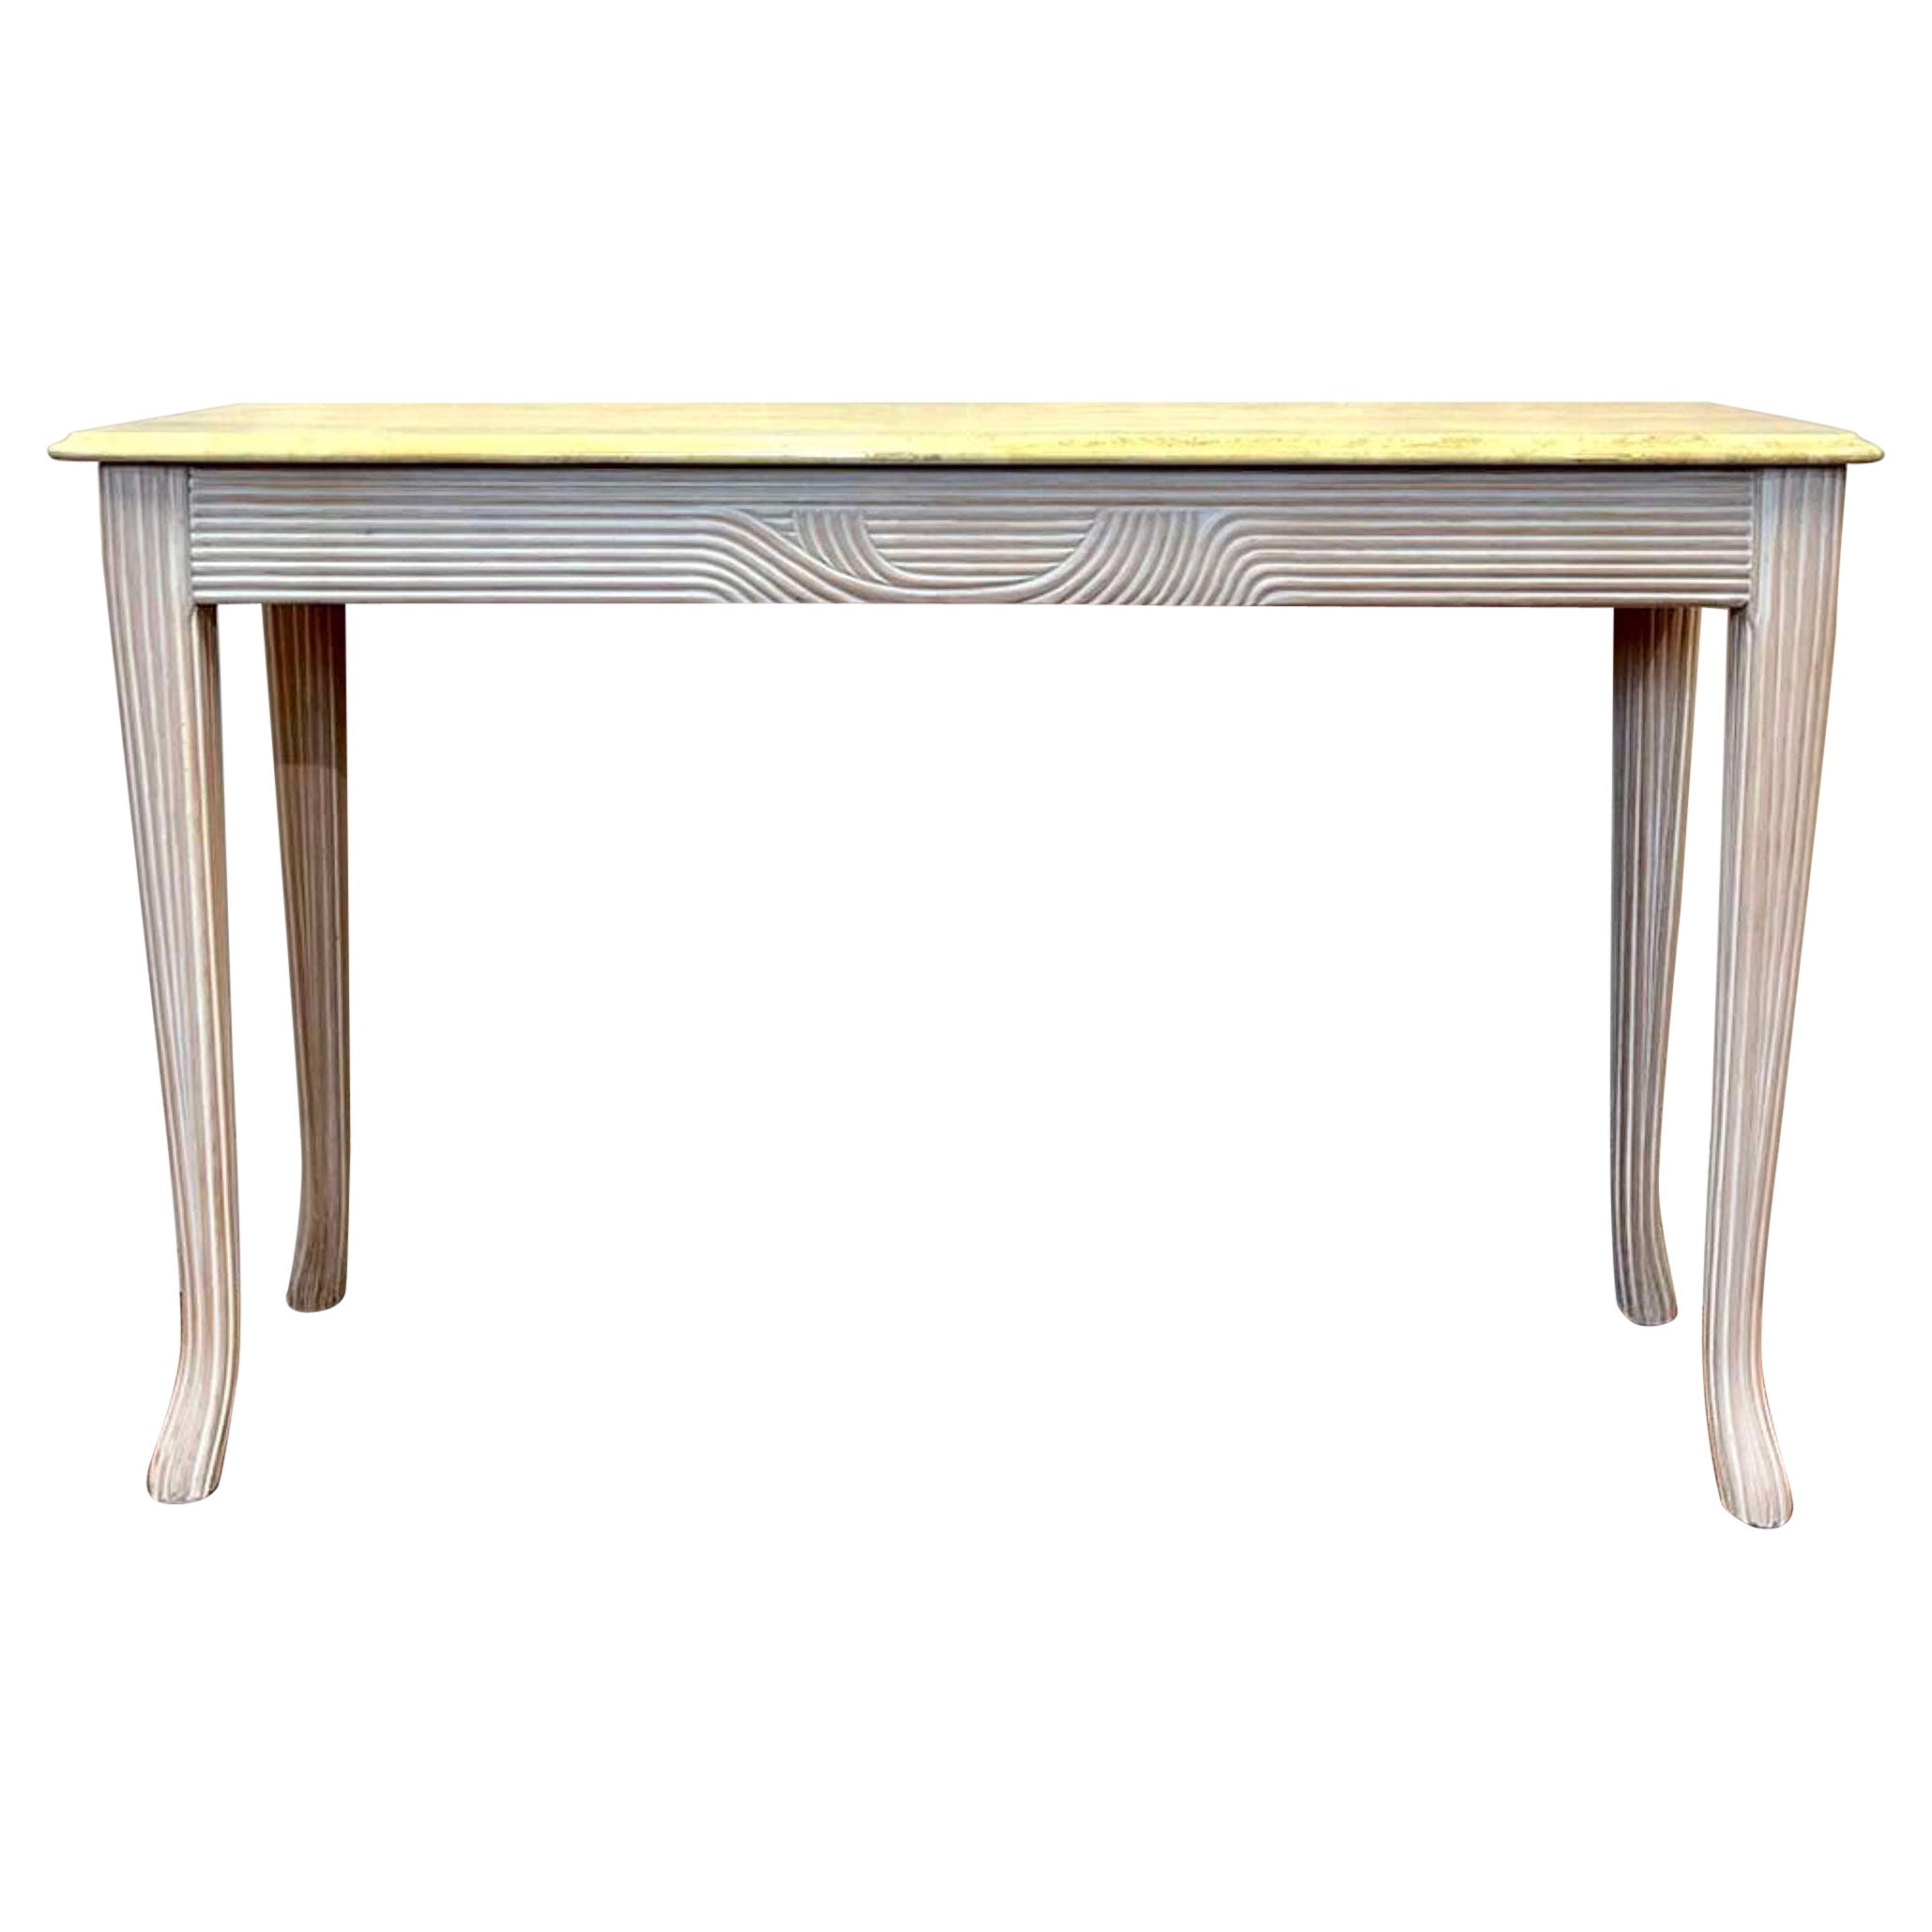 Midcentury Console Table in the Manner of Gabriella Crespi